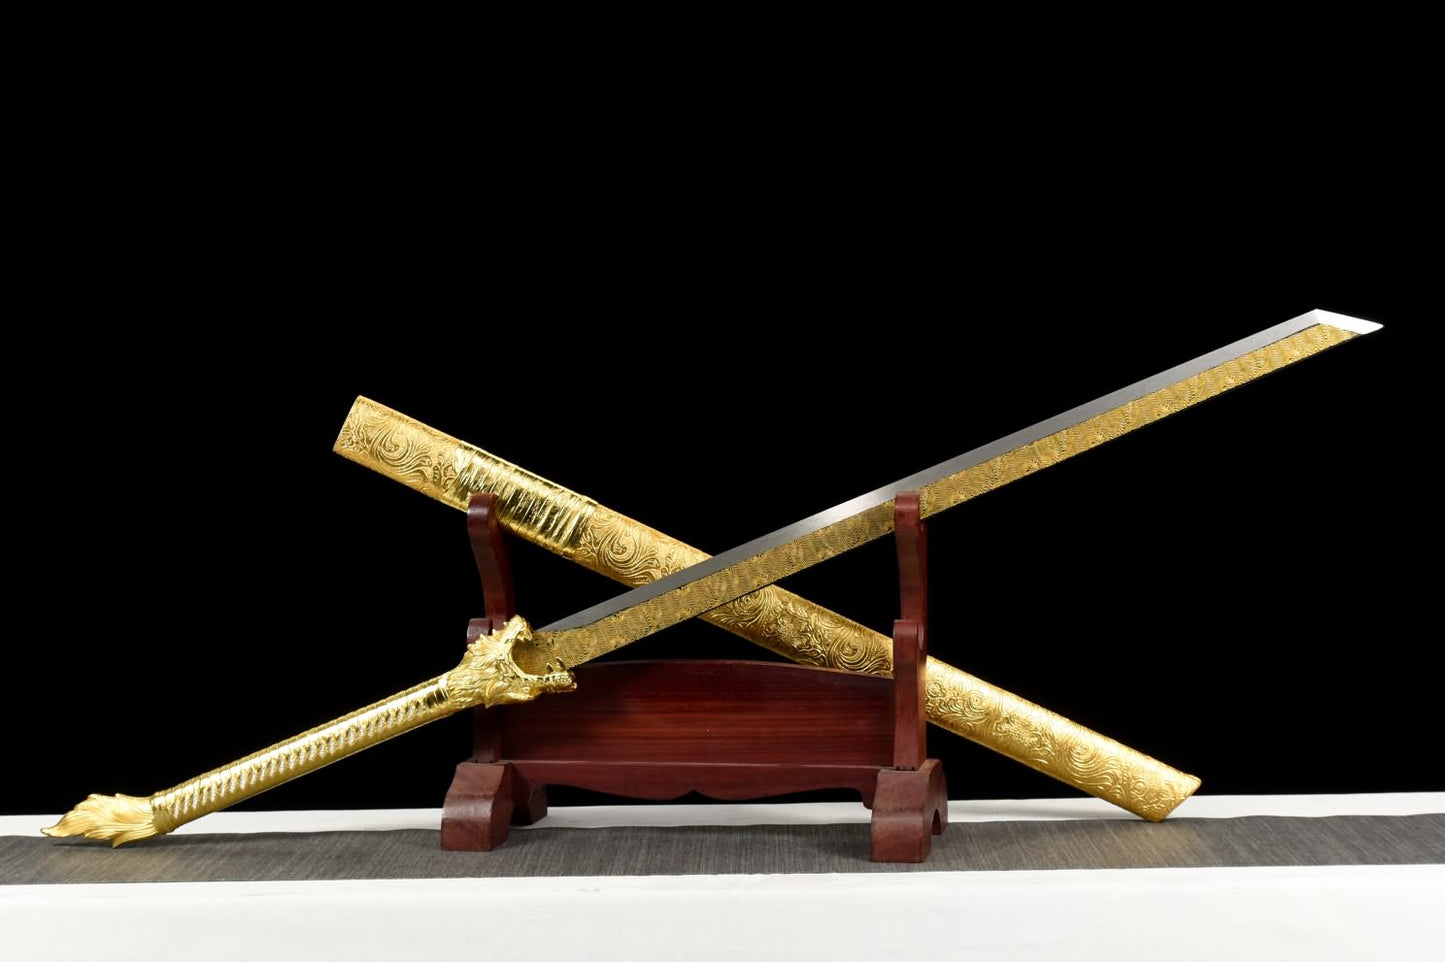 Golden Wolf Head Tang dao,Battle Ready,Hand Forged Blade,Alloy Fittings,LOONGSWORD